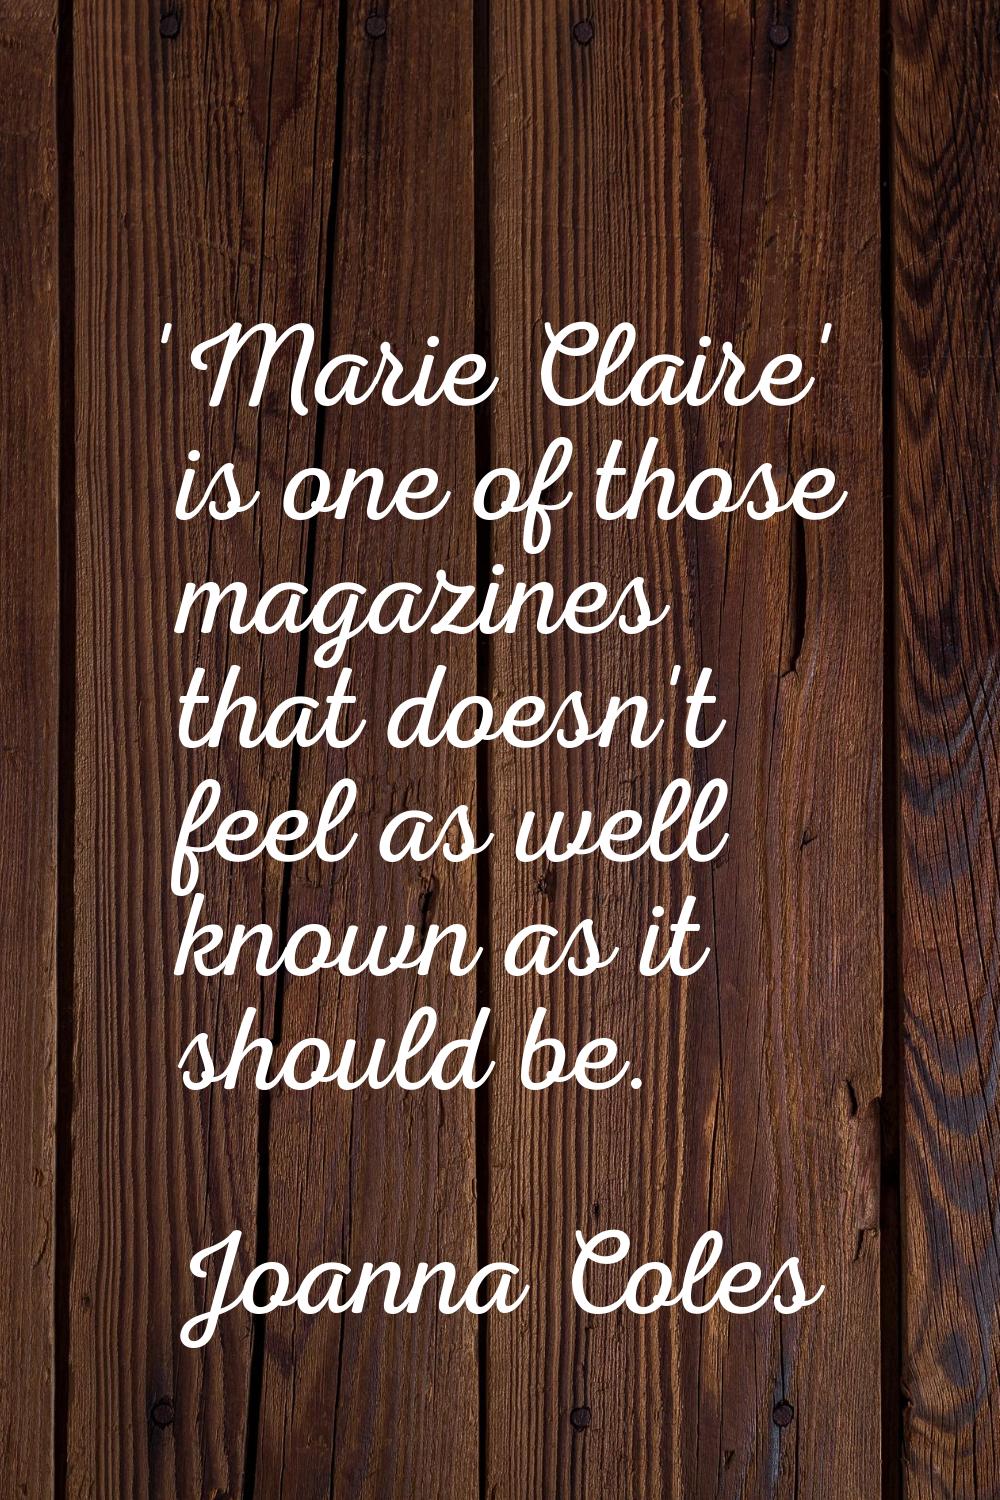 'Marie Claire' is one of those magazines that doesn't feel as well known as it should be.